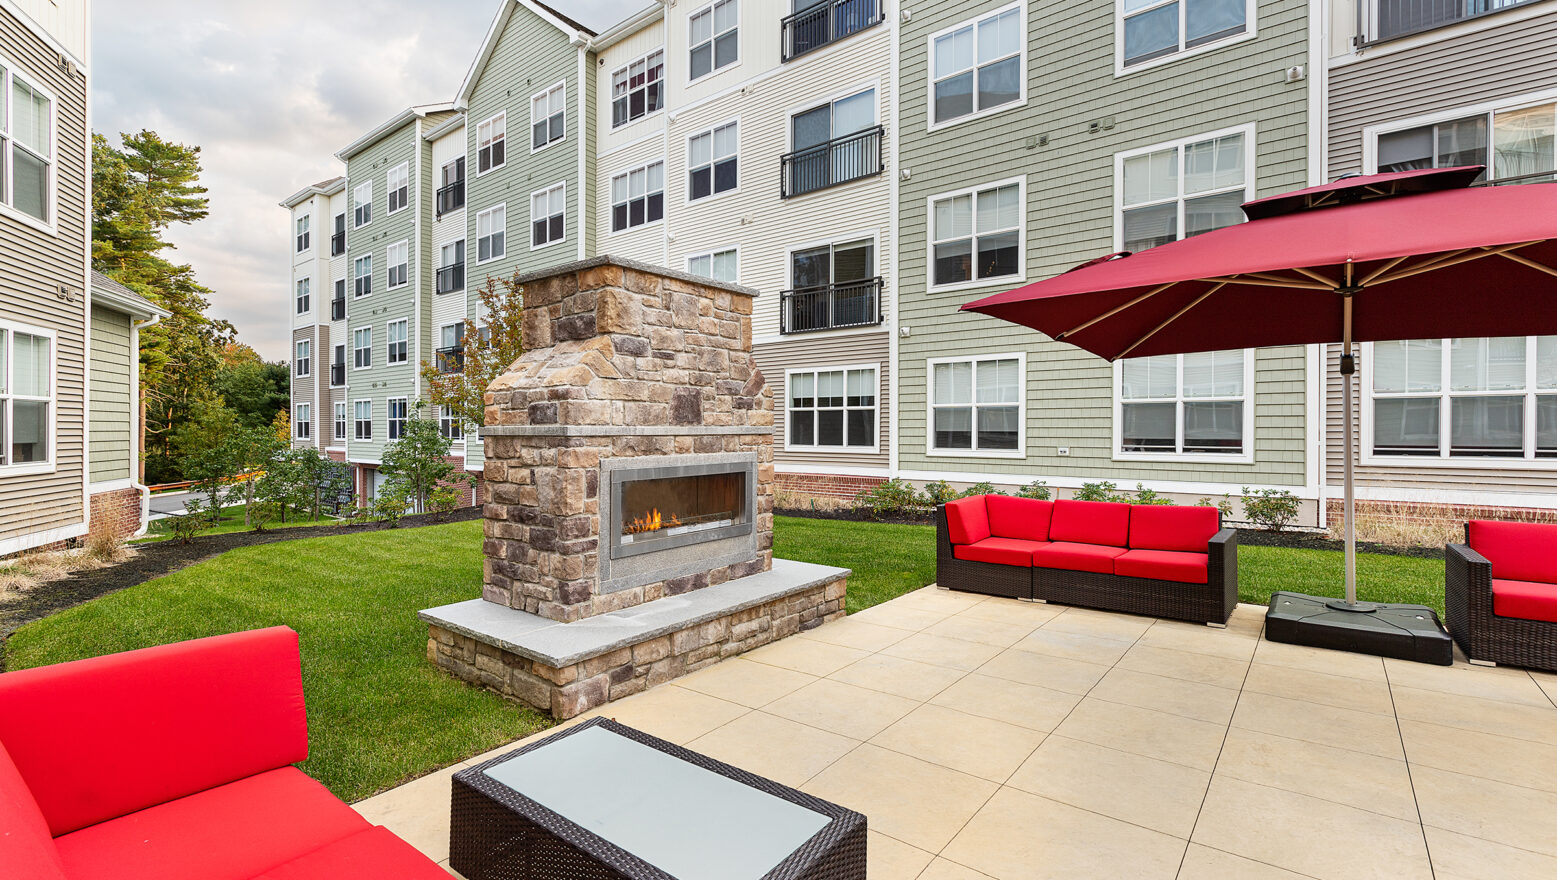 Patio and outdoor fireplace with couches at Eli Apartments in Sharon, MA. Dex by Terra landscape design-build project.